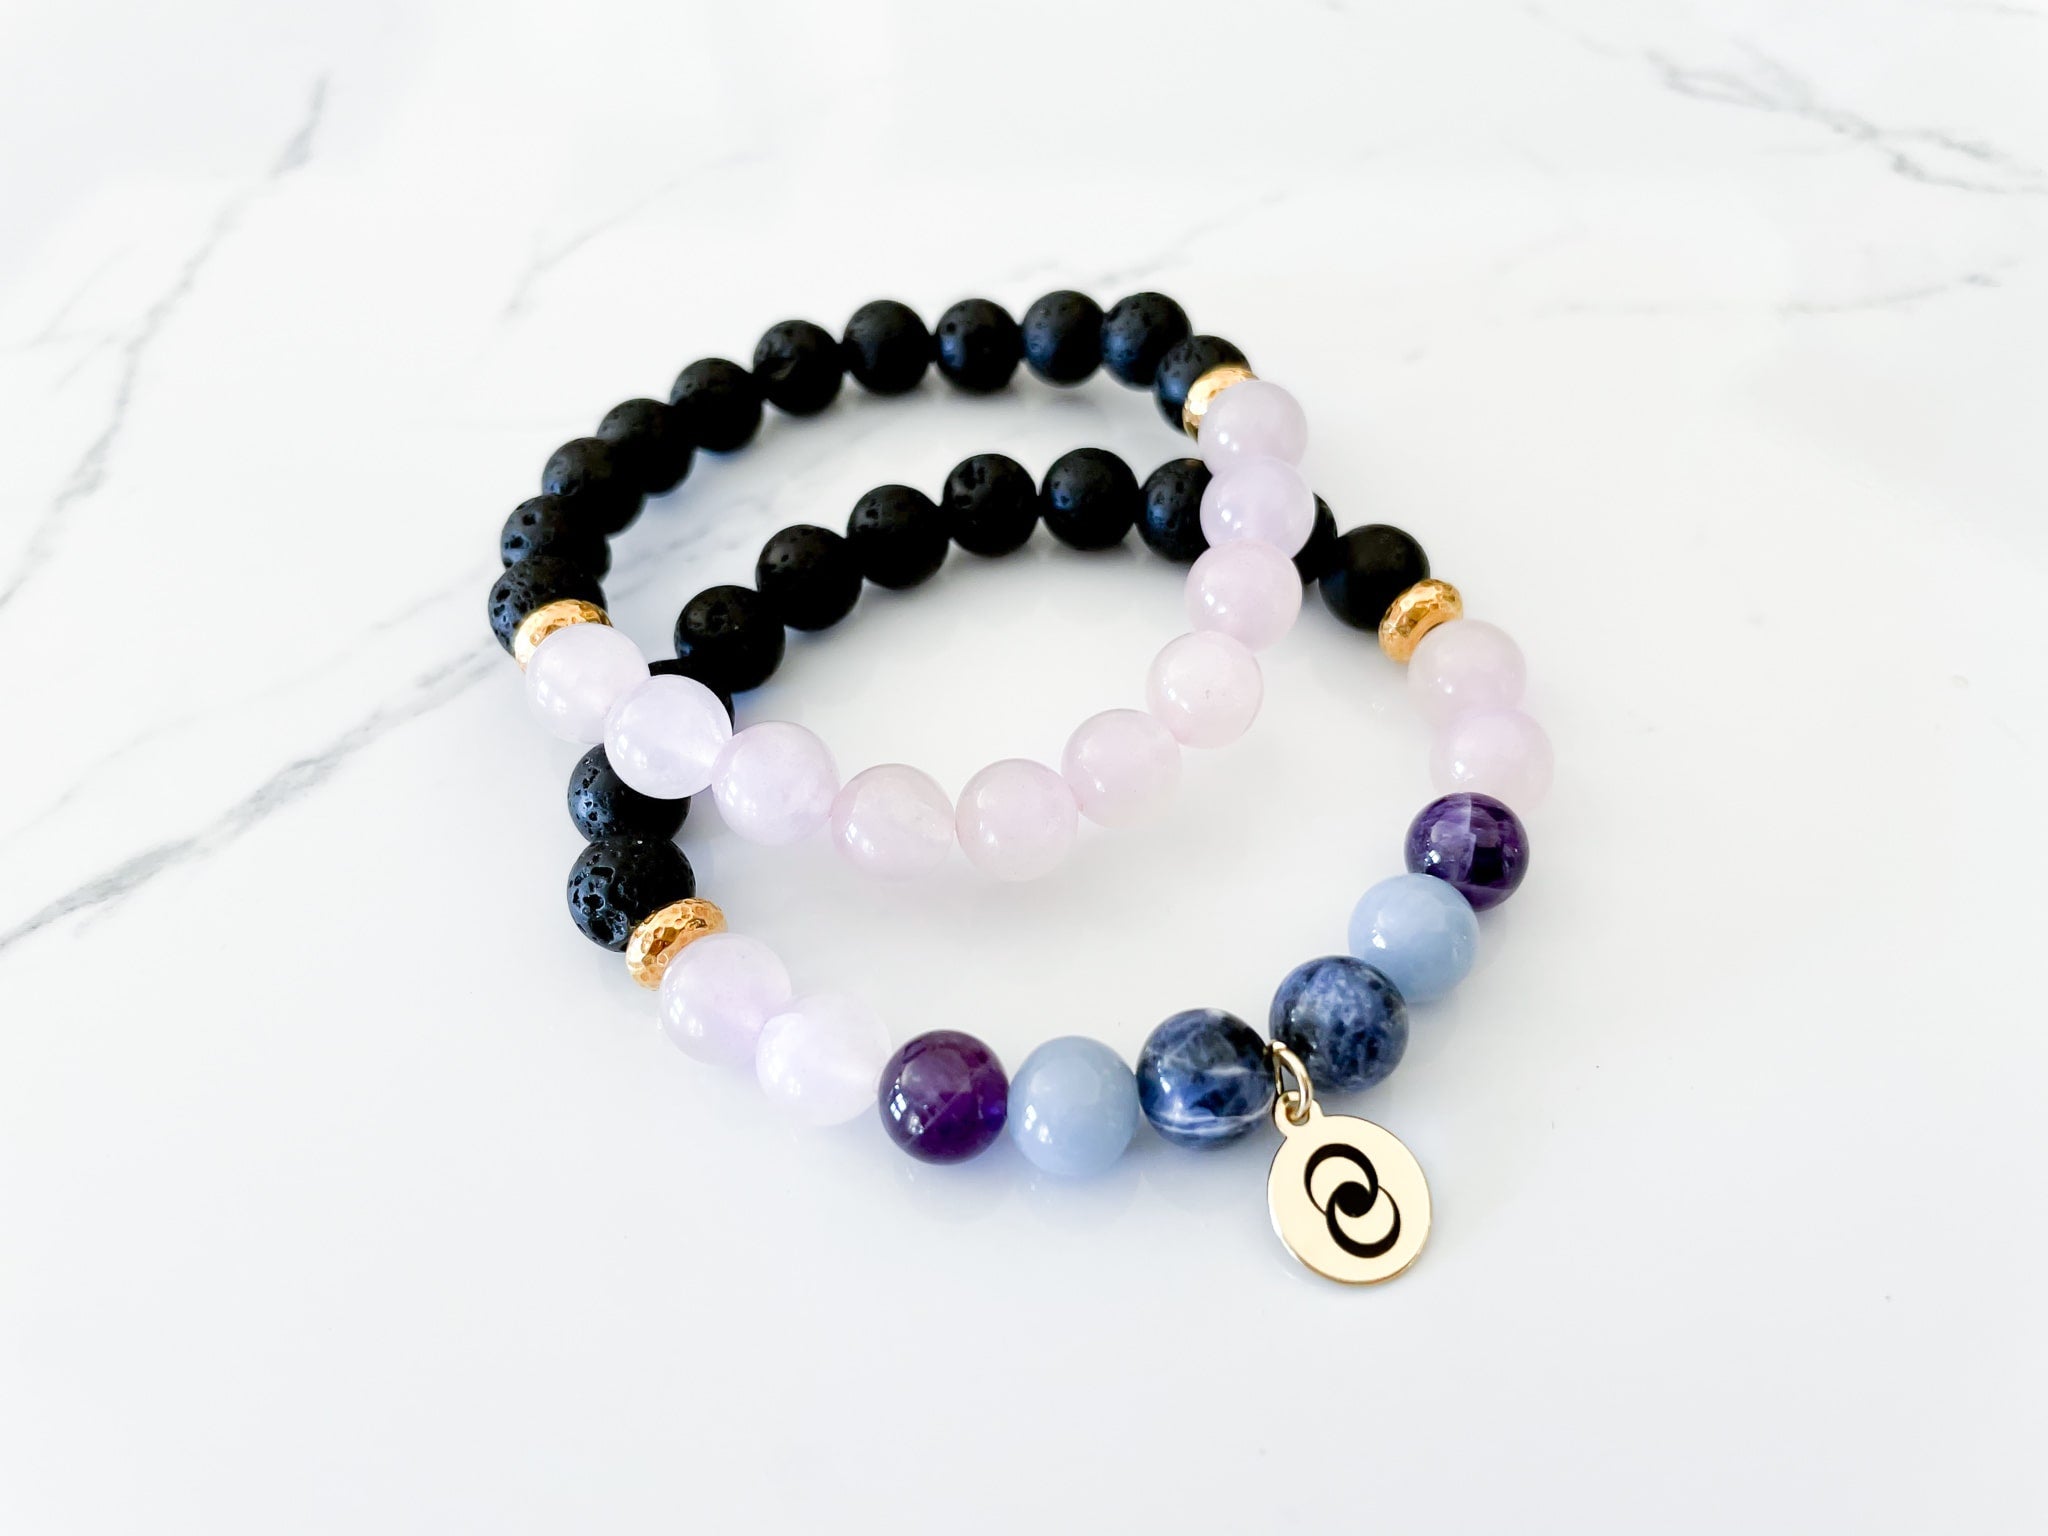 AURA Anti-Anxiety Bracelet Is the Secret to Staying Calm